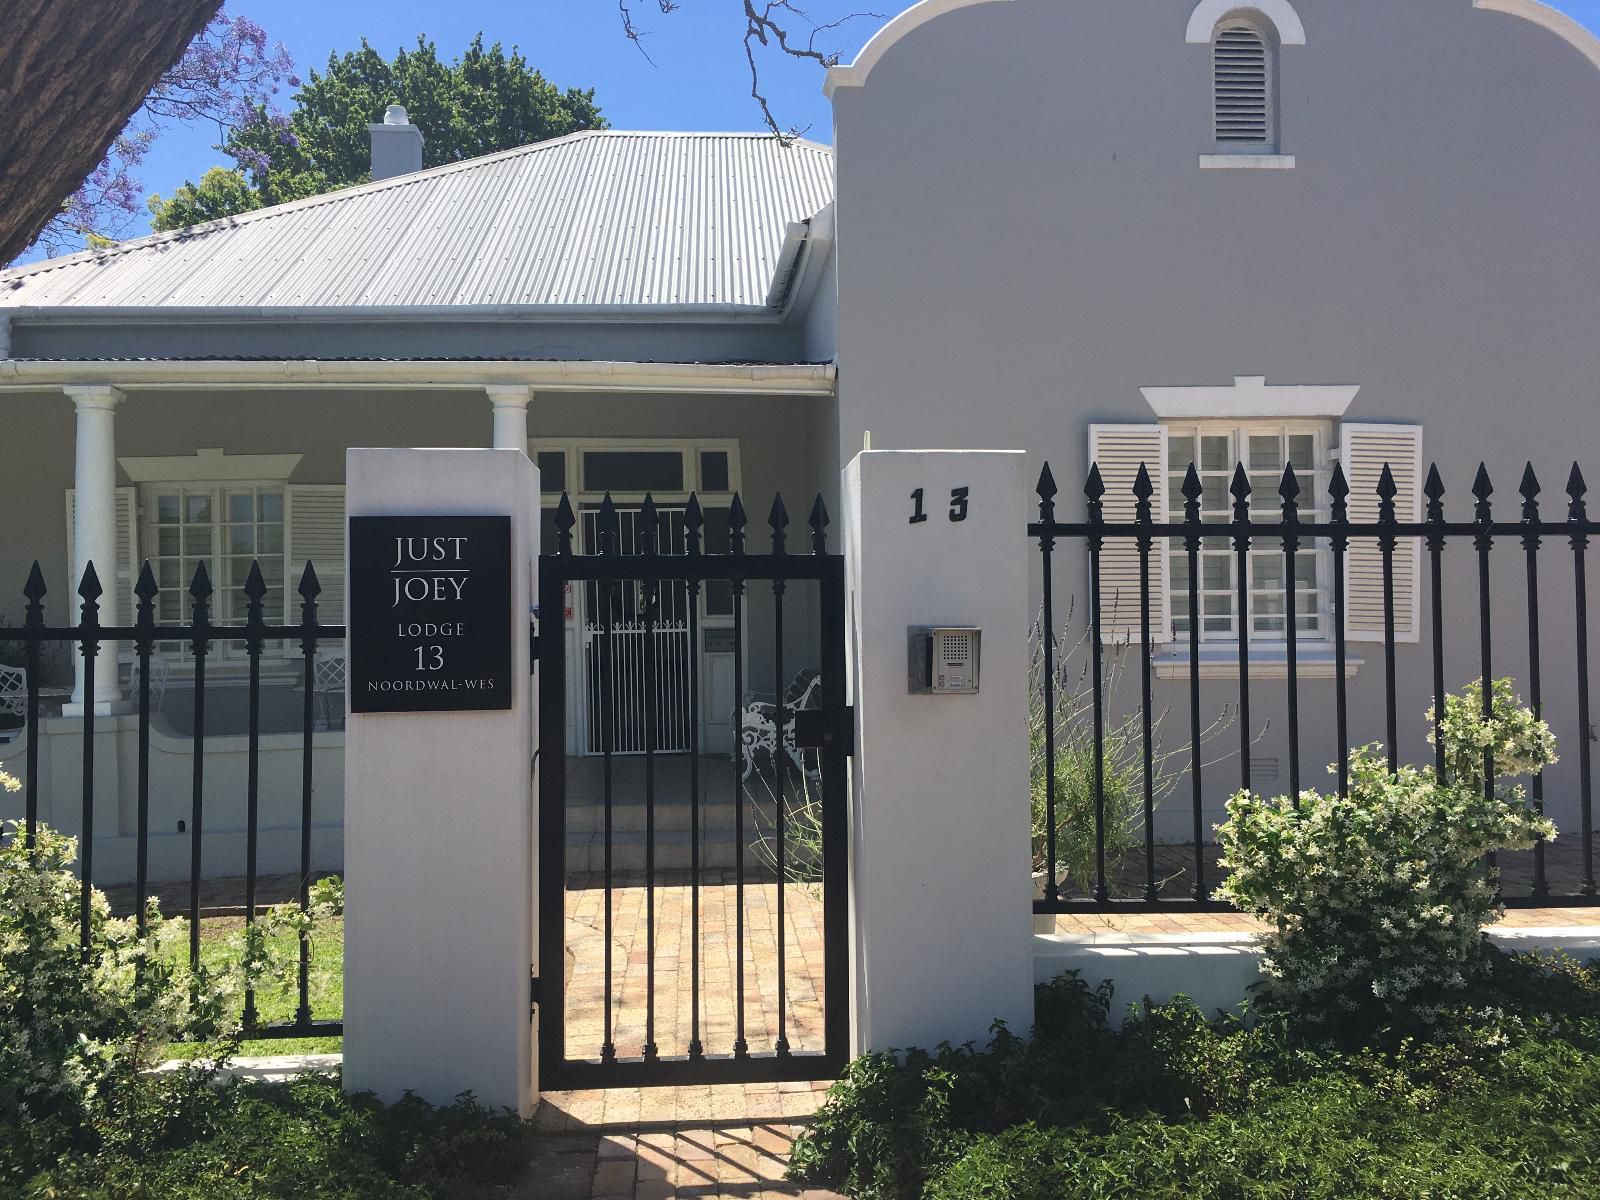 Just Joey Lodge Stellenbosch Western Cape South Africa House, Building, Architecture, Sign